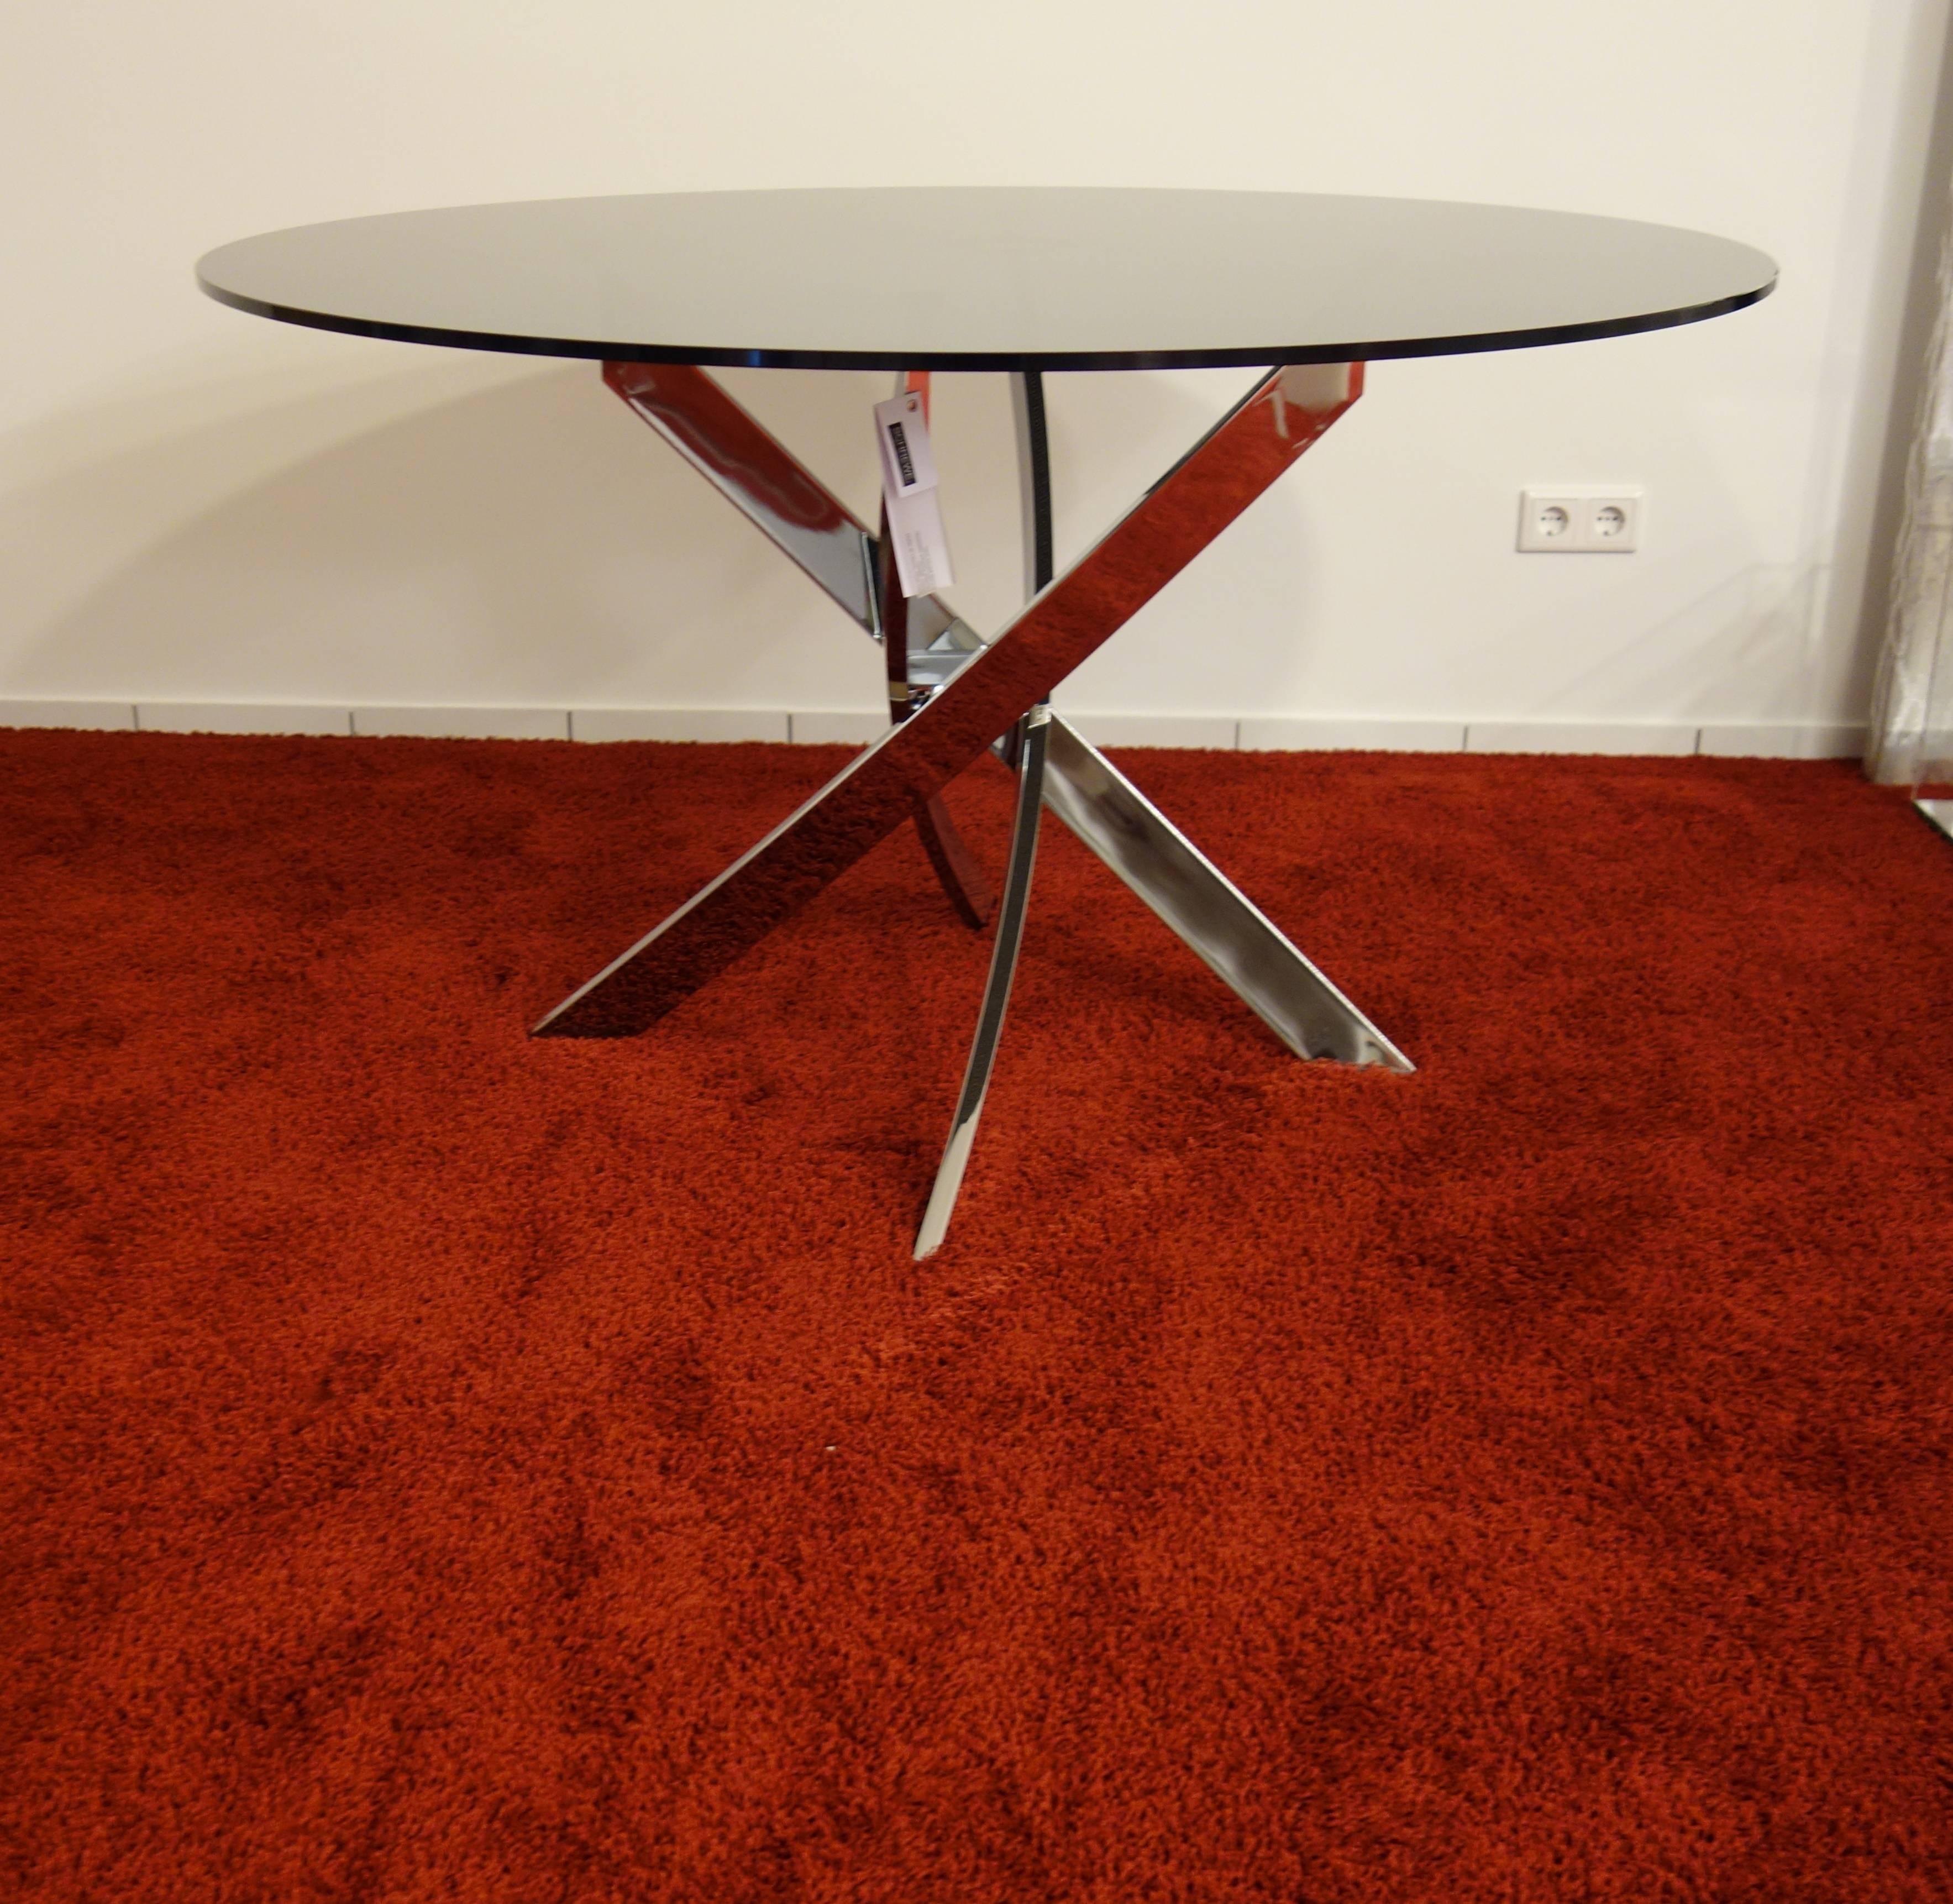 Modern 21st Century Dining Table and Stools Vanity by Italian Manufacture Bontempi For Sale